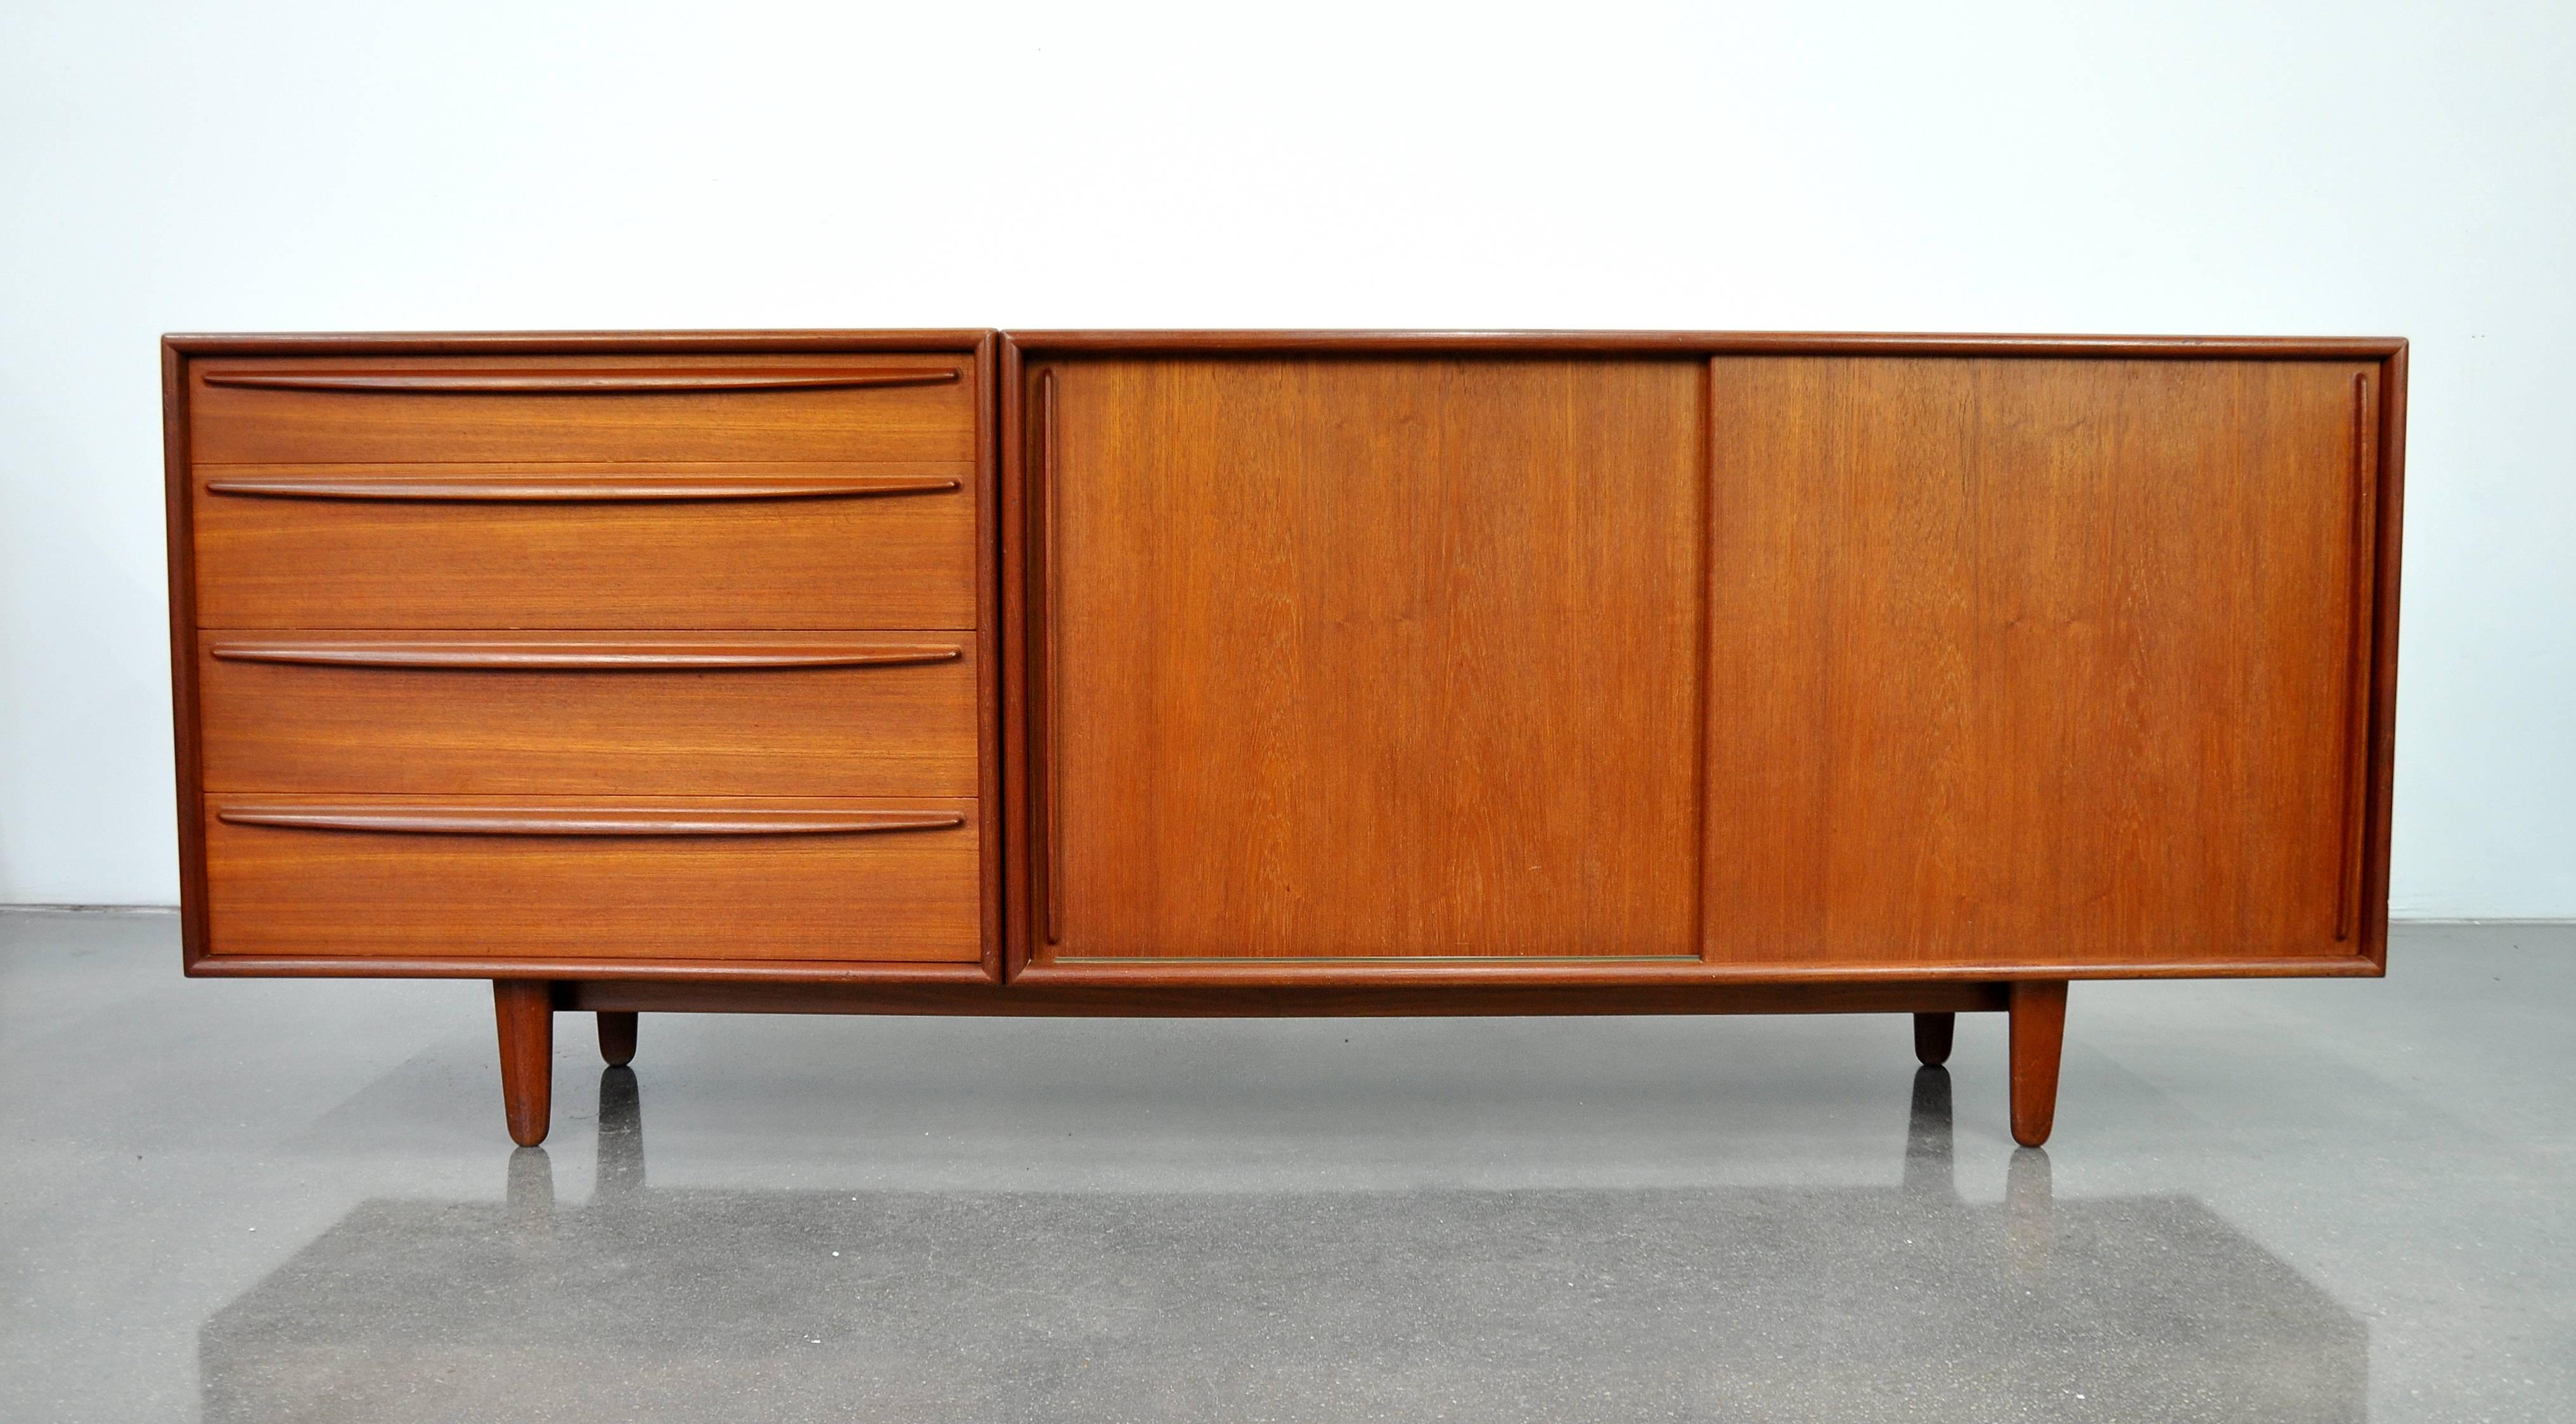 Beautiful Mid-Century Danish Modern teak bar cabinet, designed by Svend Madsen for Falster, made in Denmark in the 1960s. The sideboard features two sliding doors opening to an interior fitted with two shelves and a felt-lined drawer, and a dresser